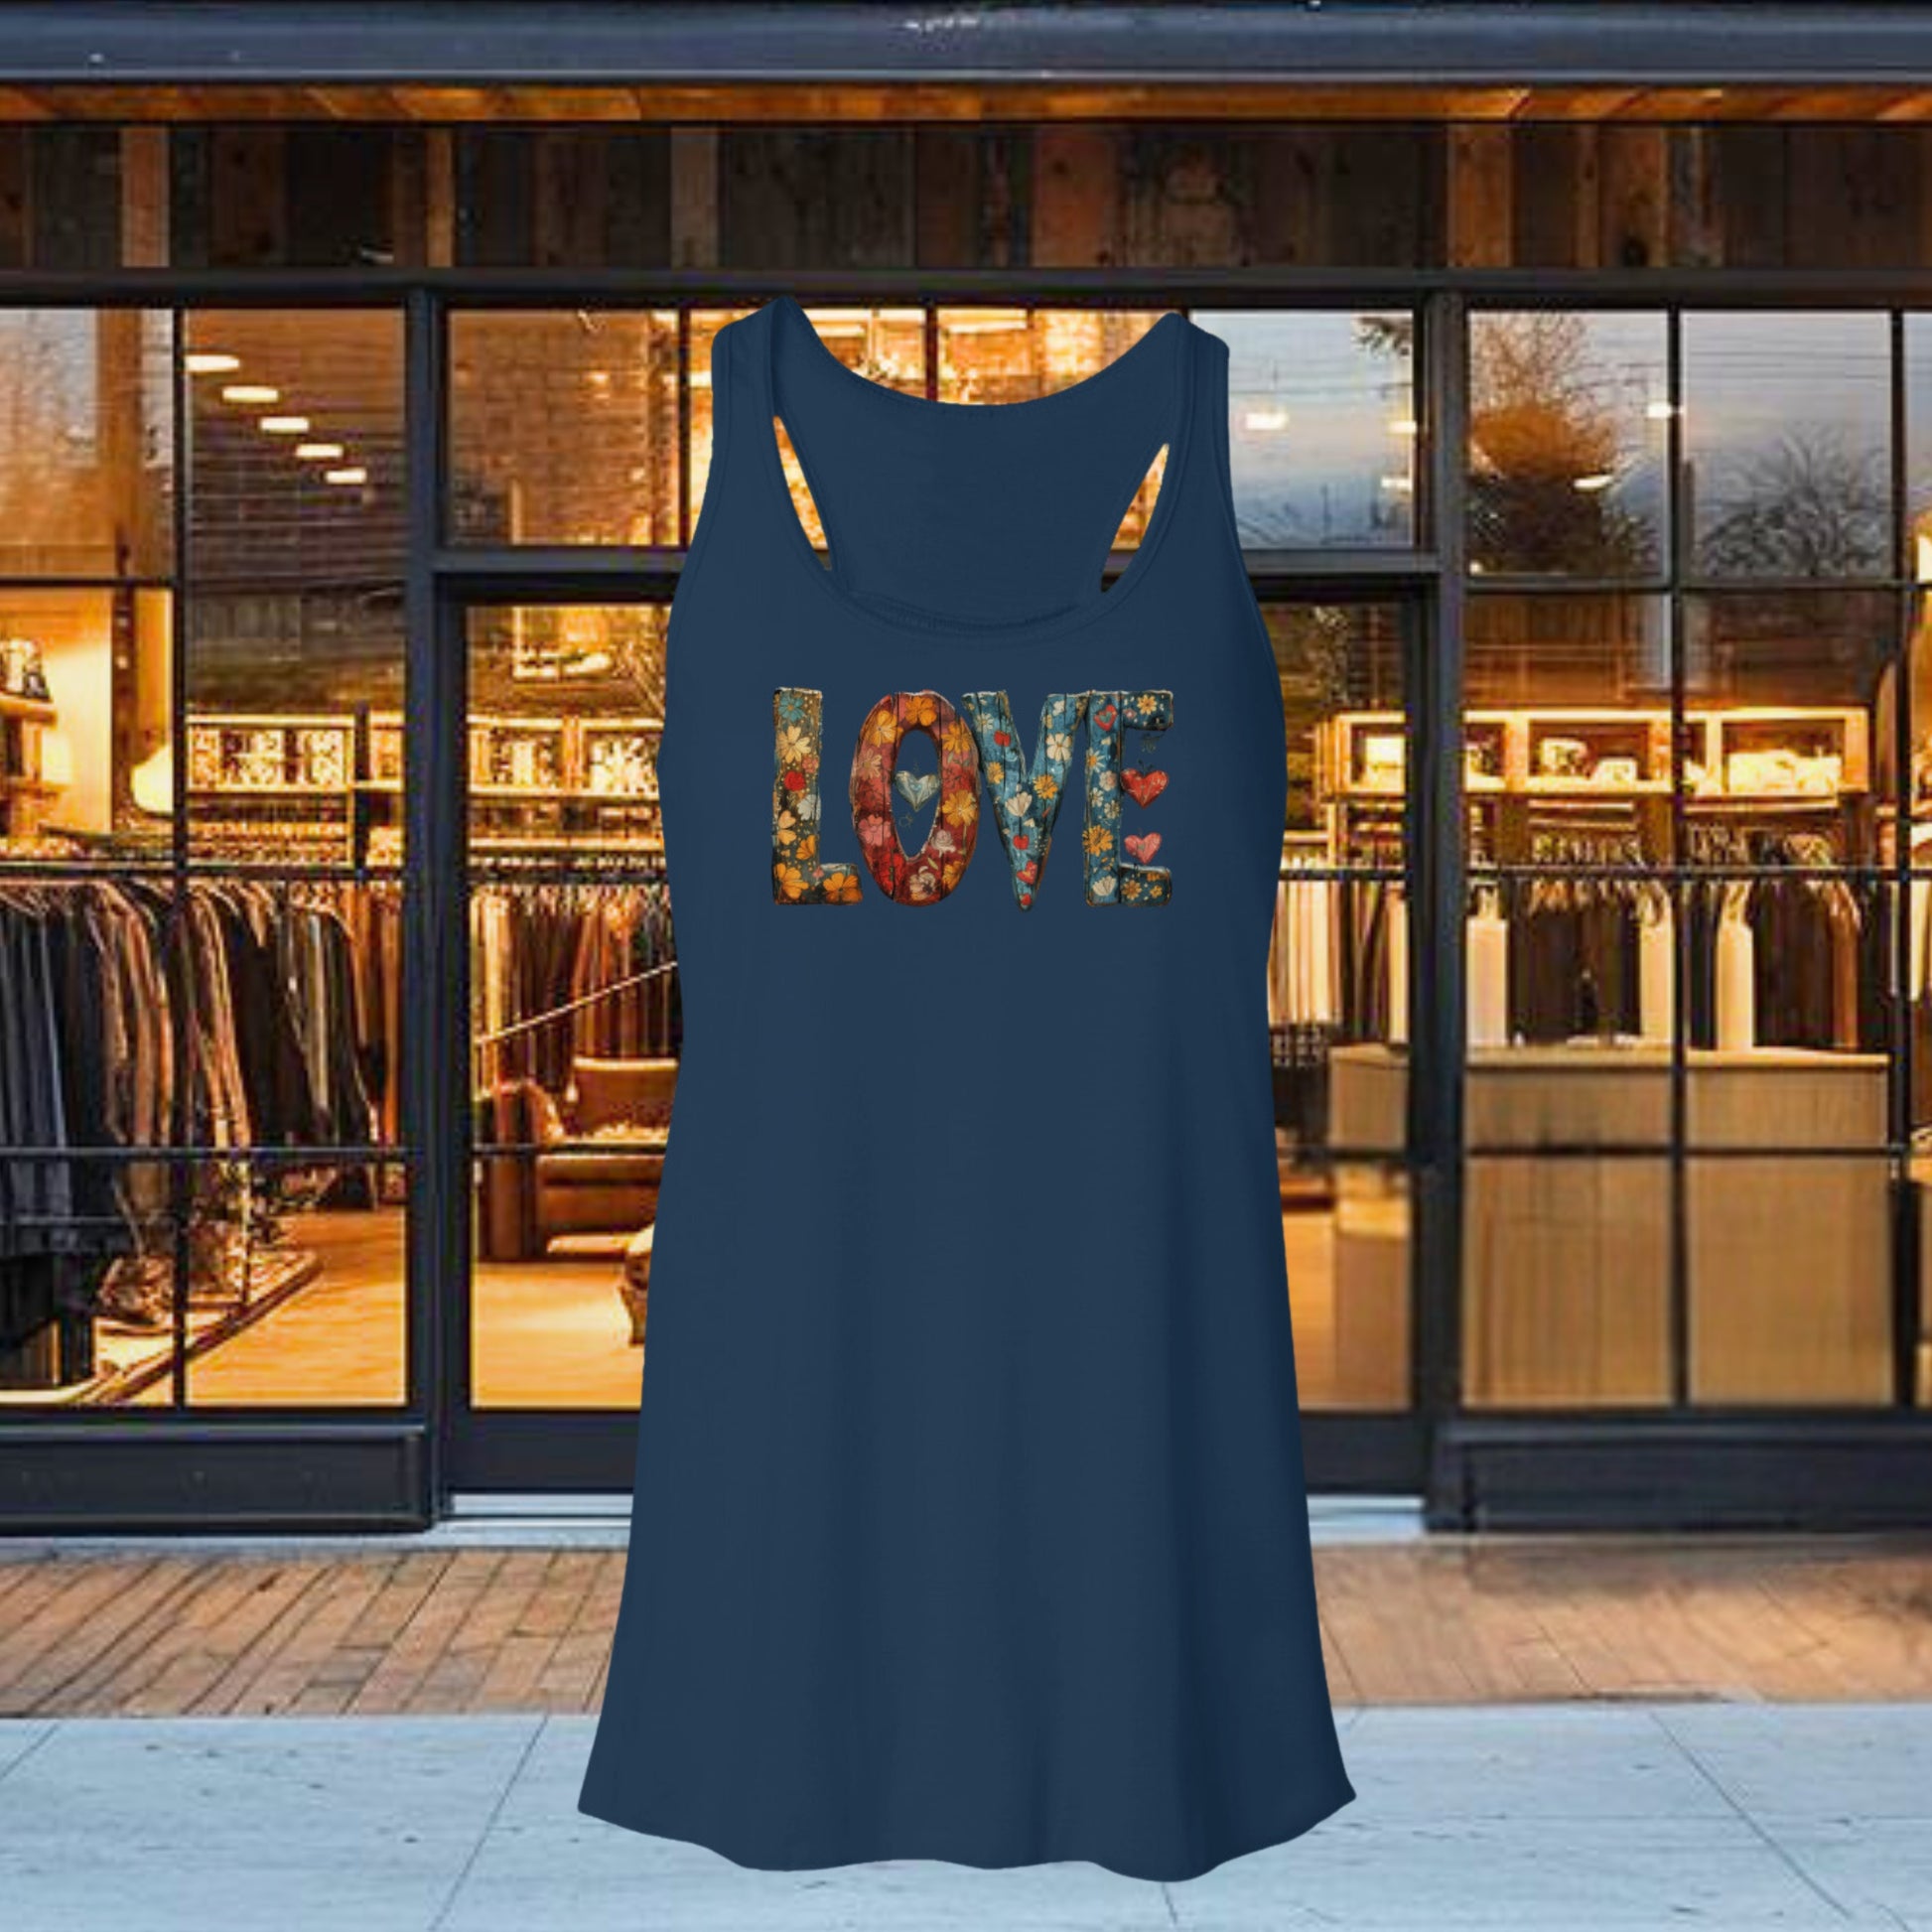 Flowy Racerback Tank, featuring the enchanting "Flowers on Hearts" design. This tank top combines style and grace, making it a perfect addition to your wardrobe for any occasion.